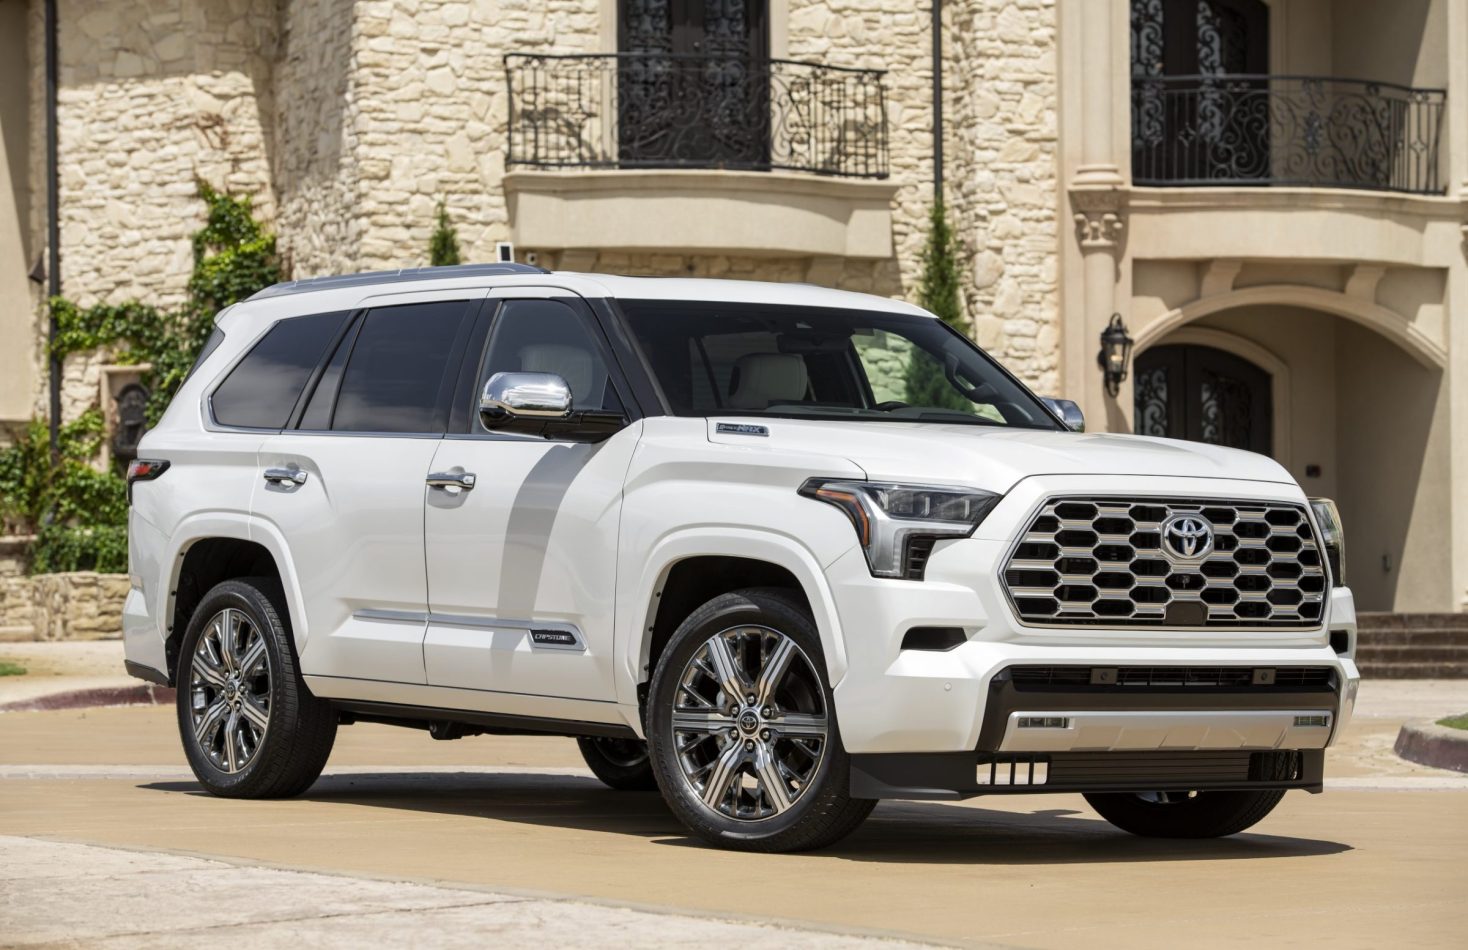 The Best Large SUVs to Rent on a Budget